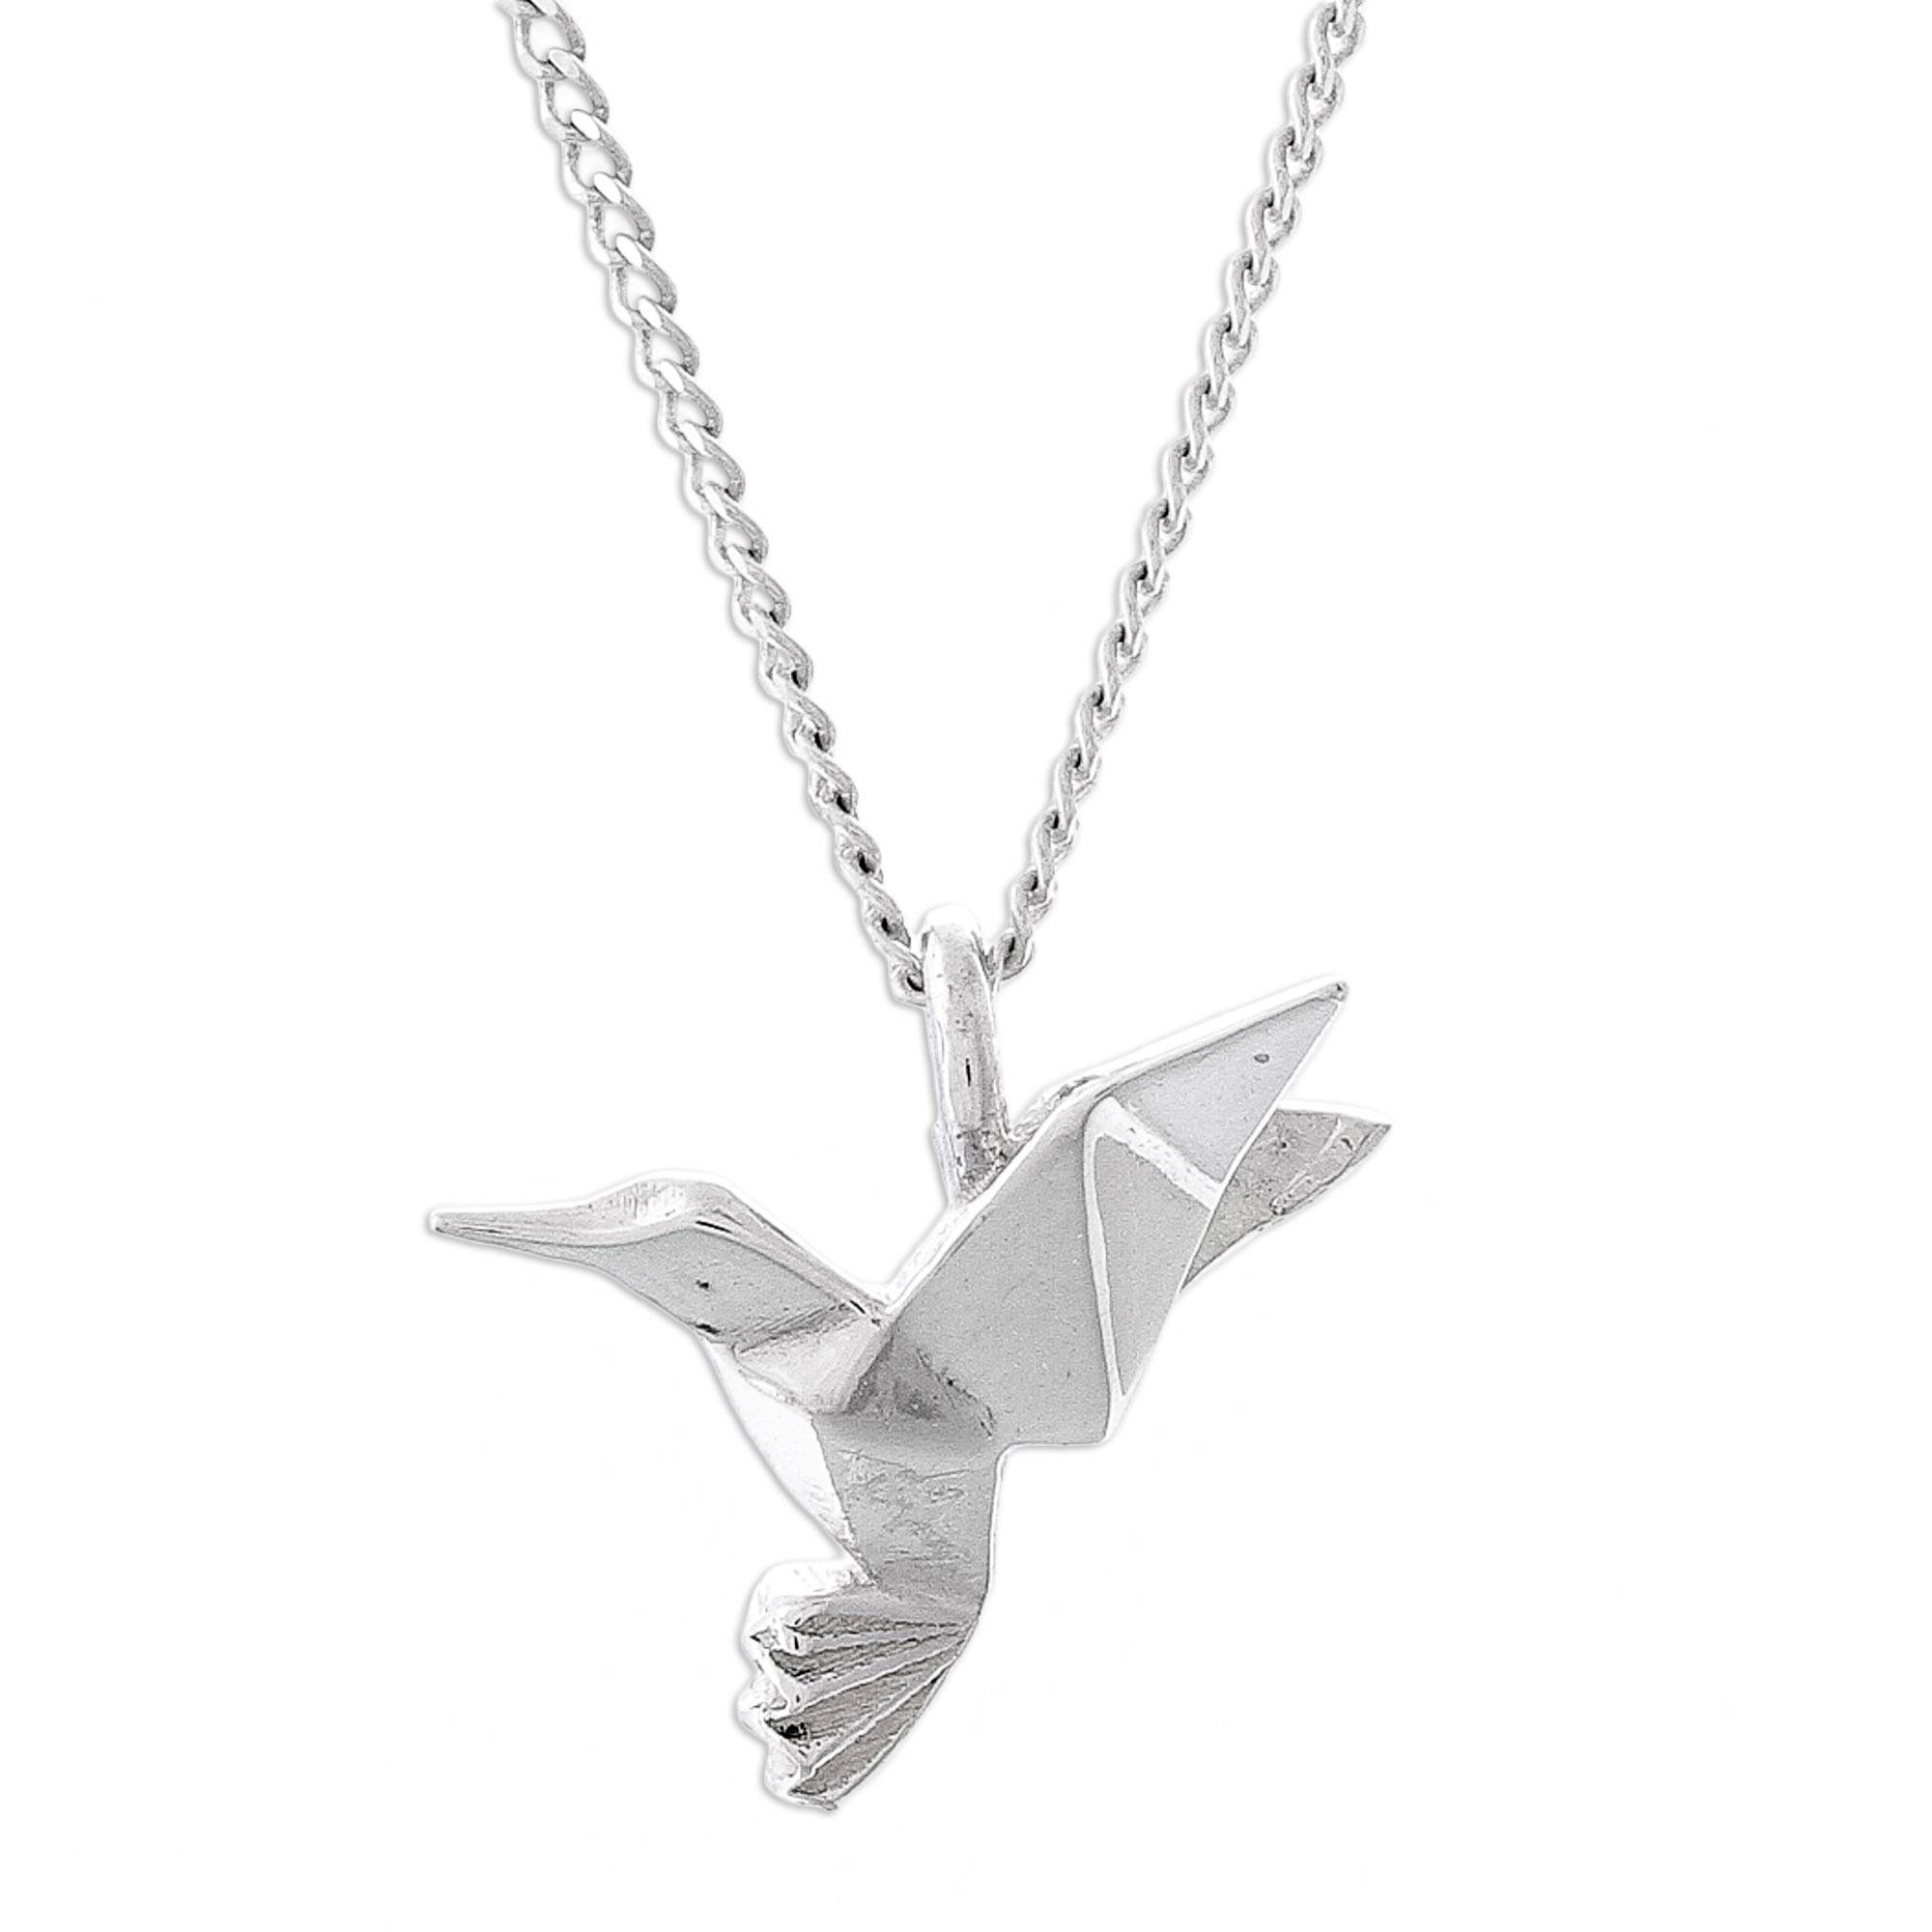 Origami Hummingbird Step By Step Sterling Silver Hummingbird Pendant Necklace From Mexico Origami Hummingbird